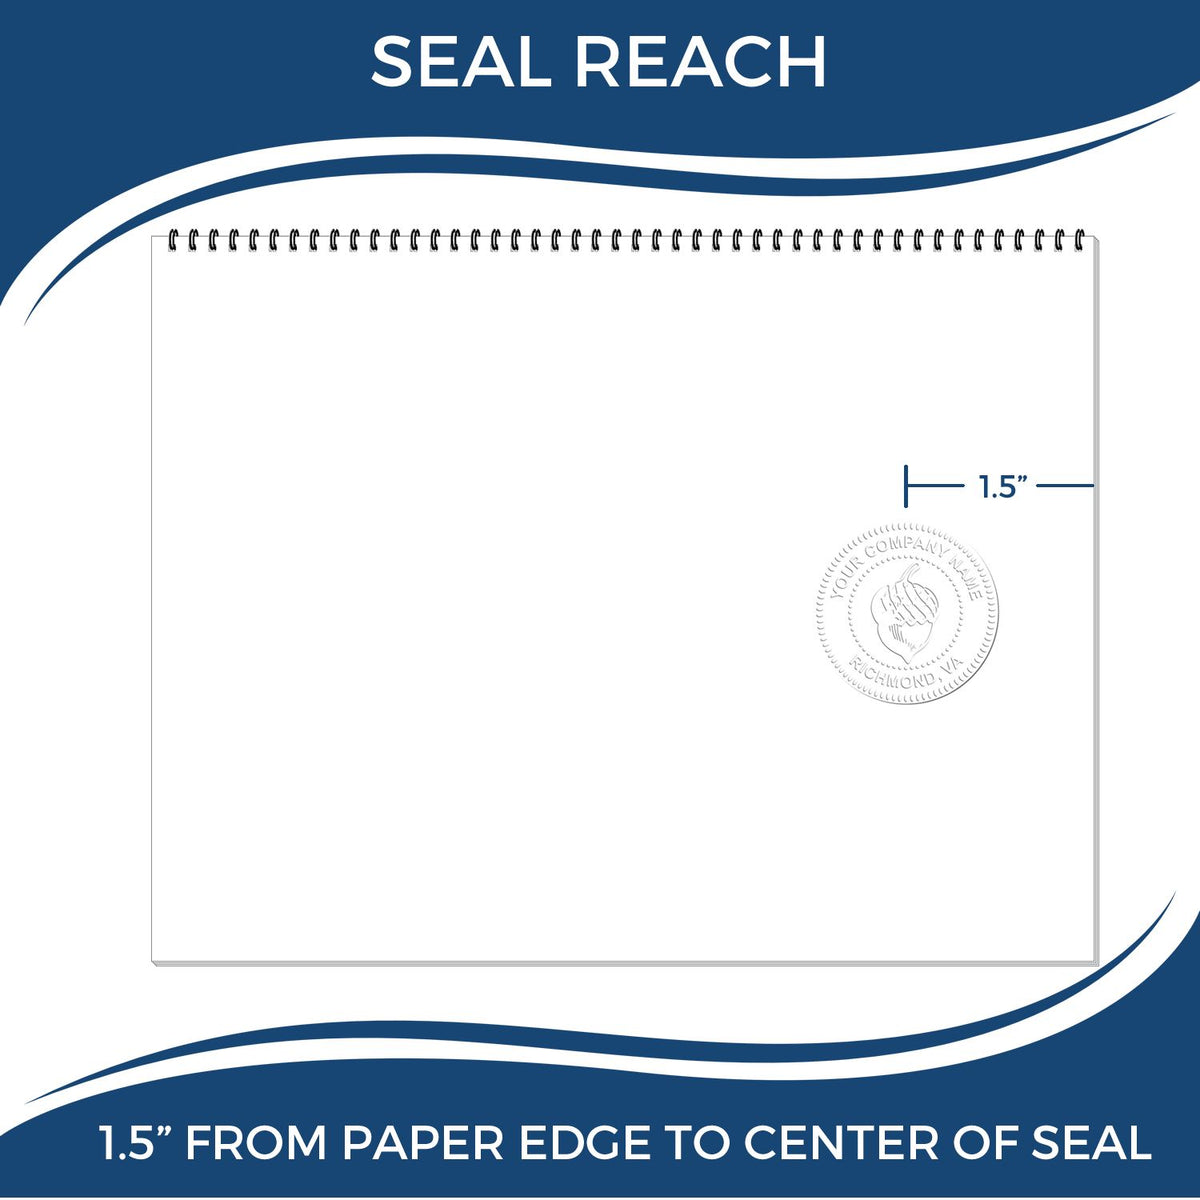 An infographic showing the seal reach which is represented by a ruler and a miniature seal image of the Indiana Engineer Desk Seal